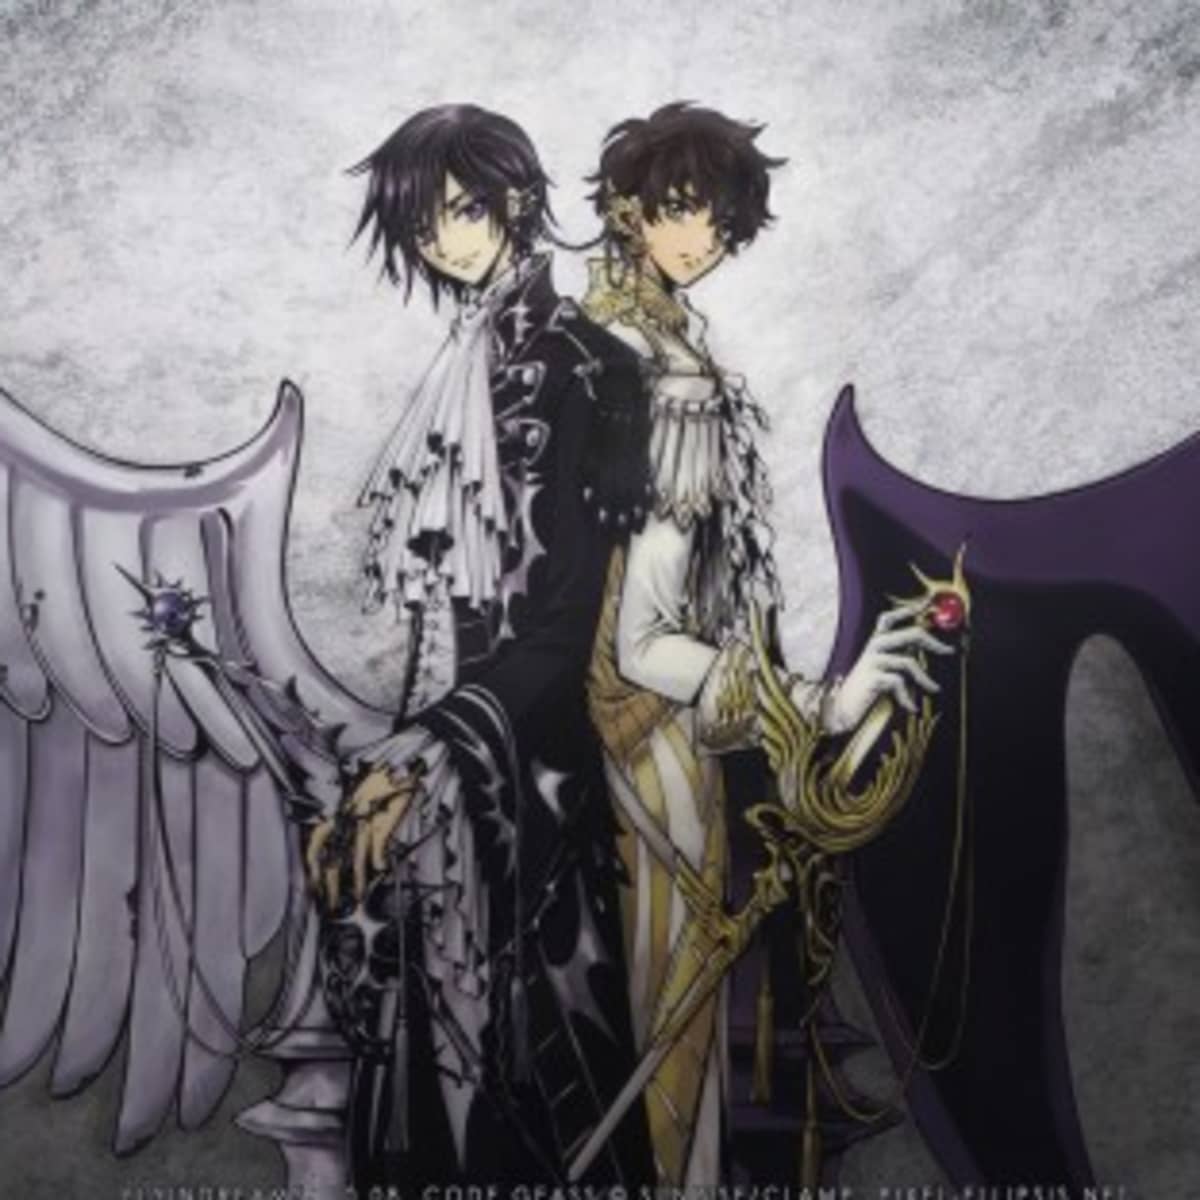 Lelouch Lamperouge (Code Geass) - Incredible Characters Wiki